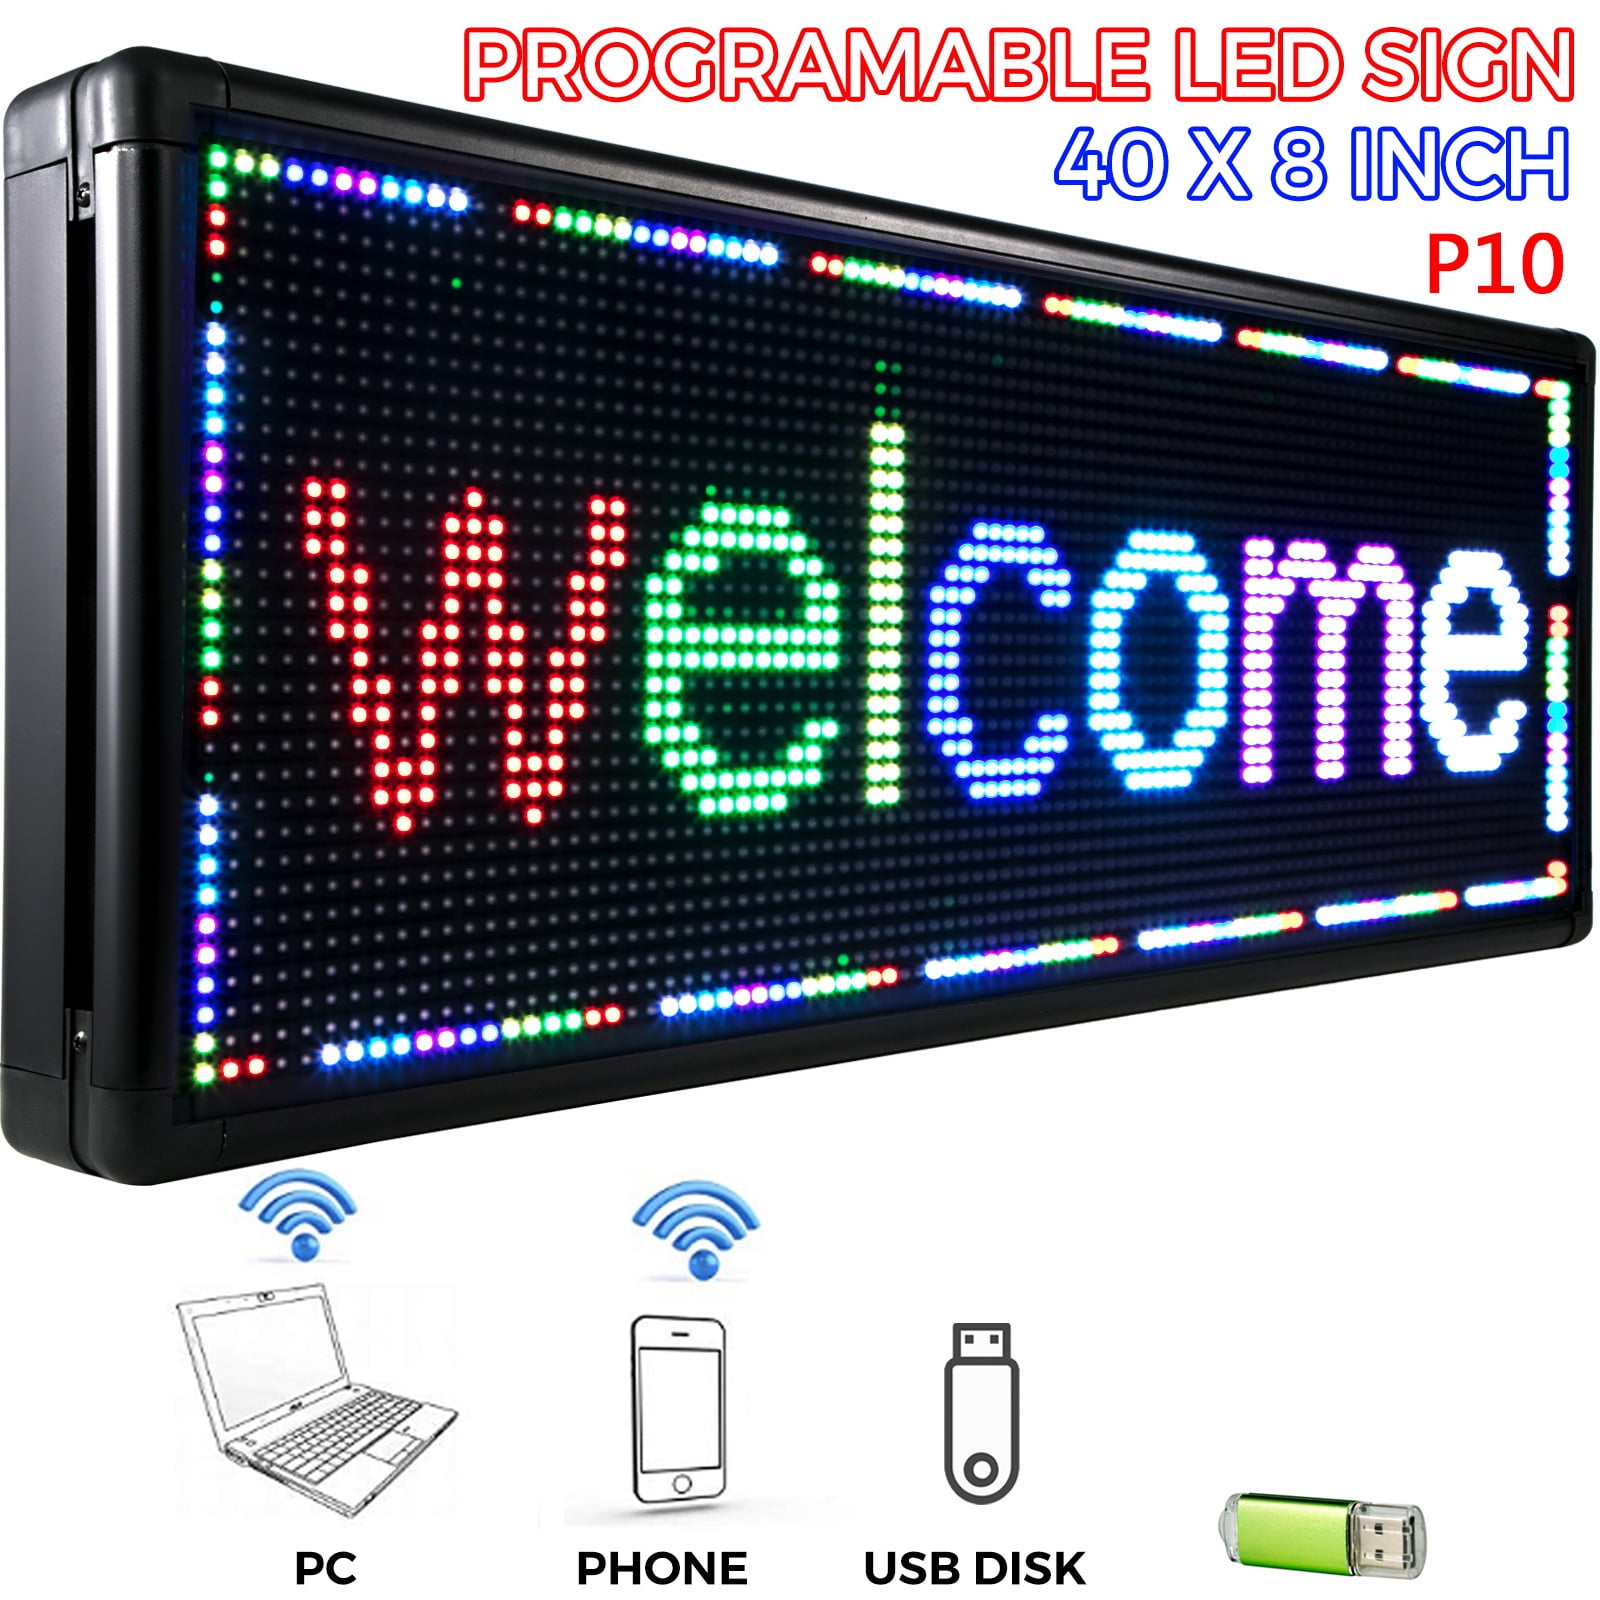 Full Color LED Sign 25"x 6.5" Scrolling Programmable Message Board PC Controlled 